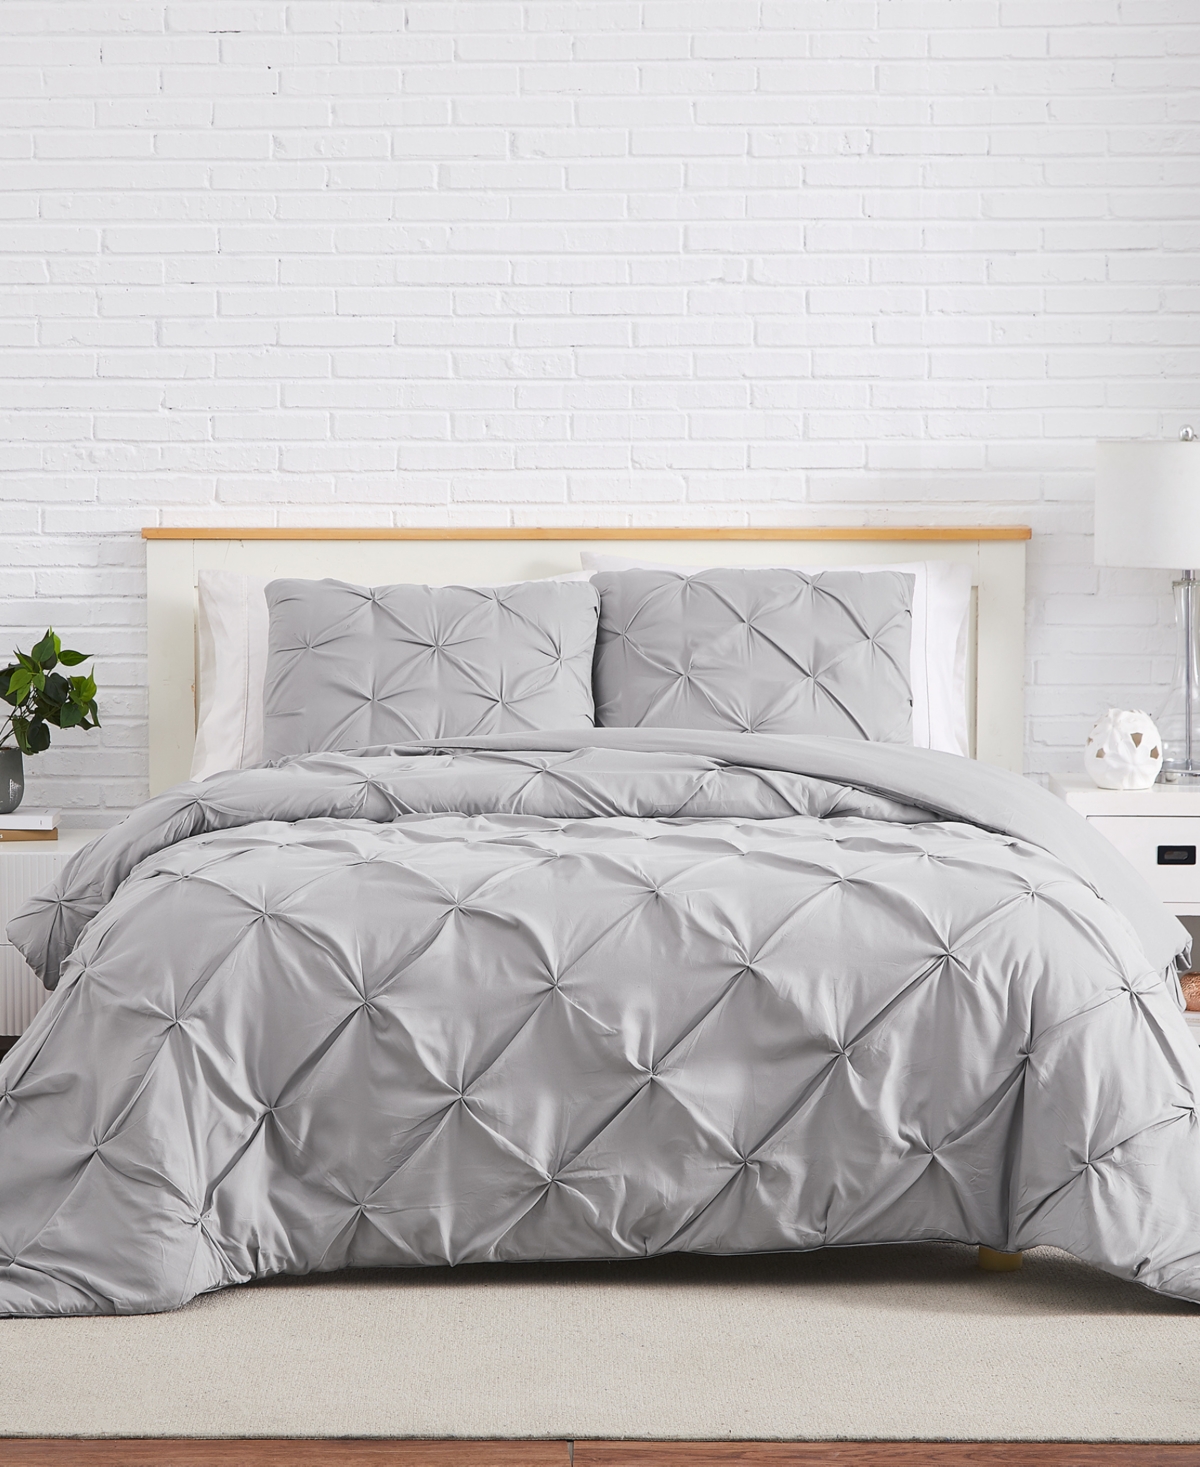 Southshore Fine Linens Pintuck 3 Piece Duvet Cover And Sham Set, Full/queen In Gray